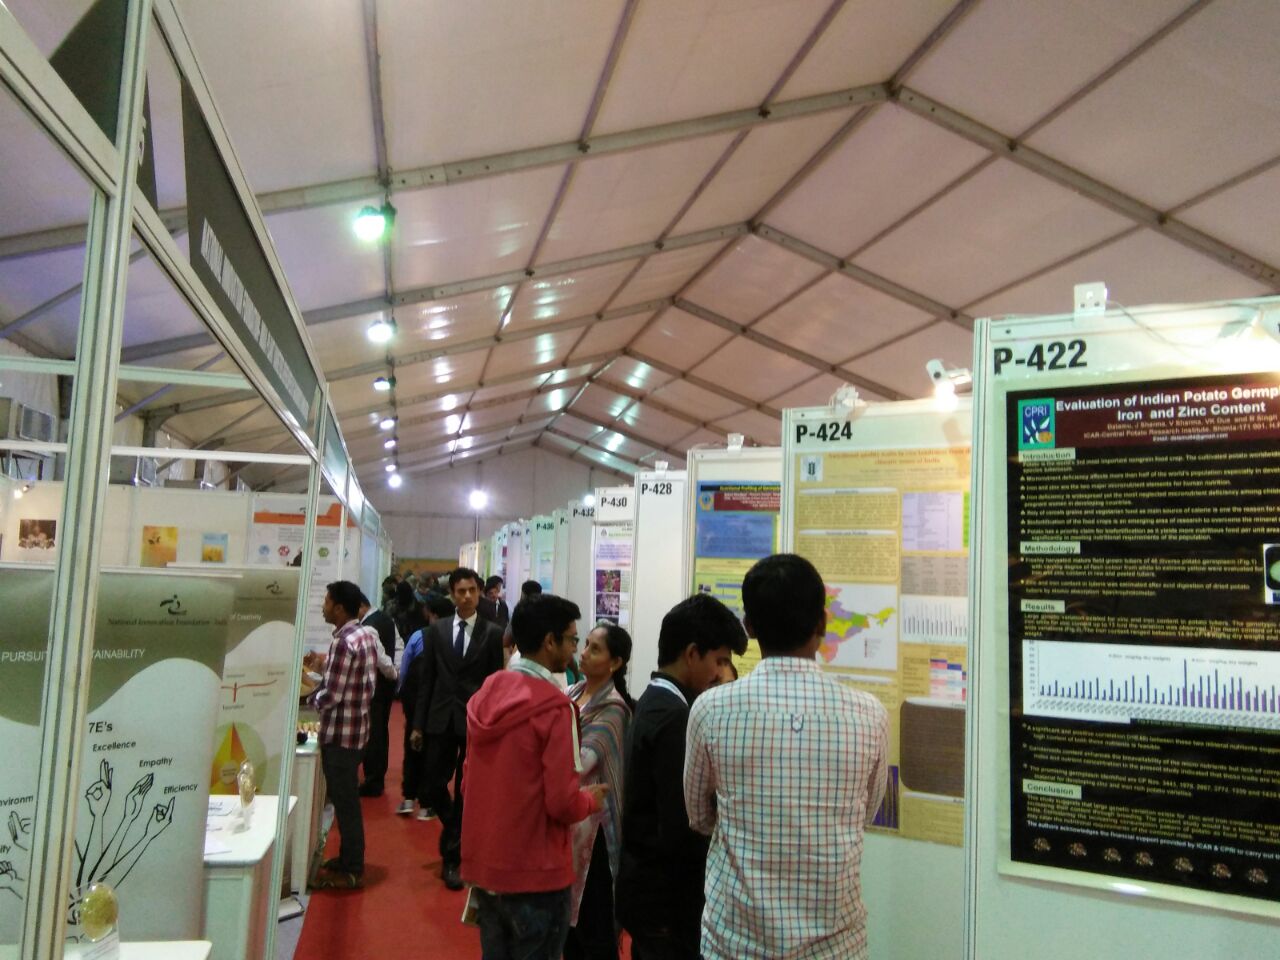 A hallway of poster from various organisations who share their research experiences for sustainable management and utilisation of Agrobiodiversity.